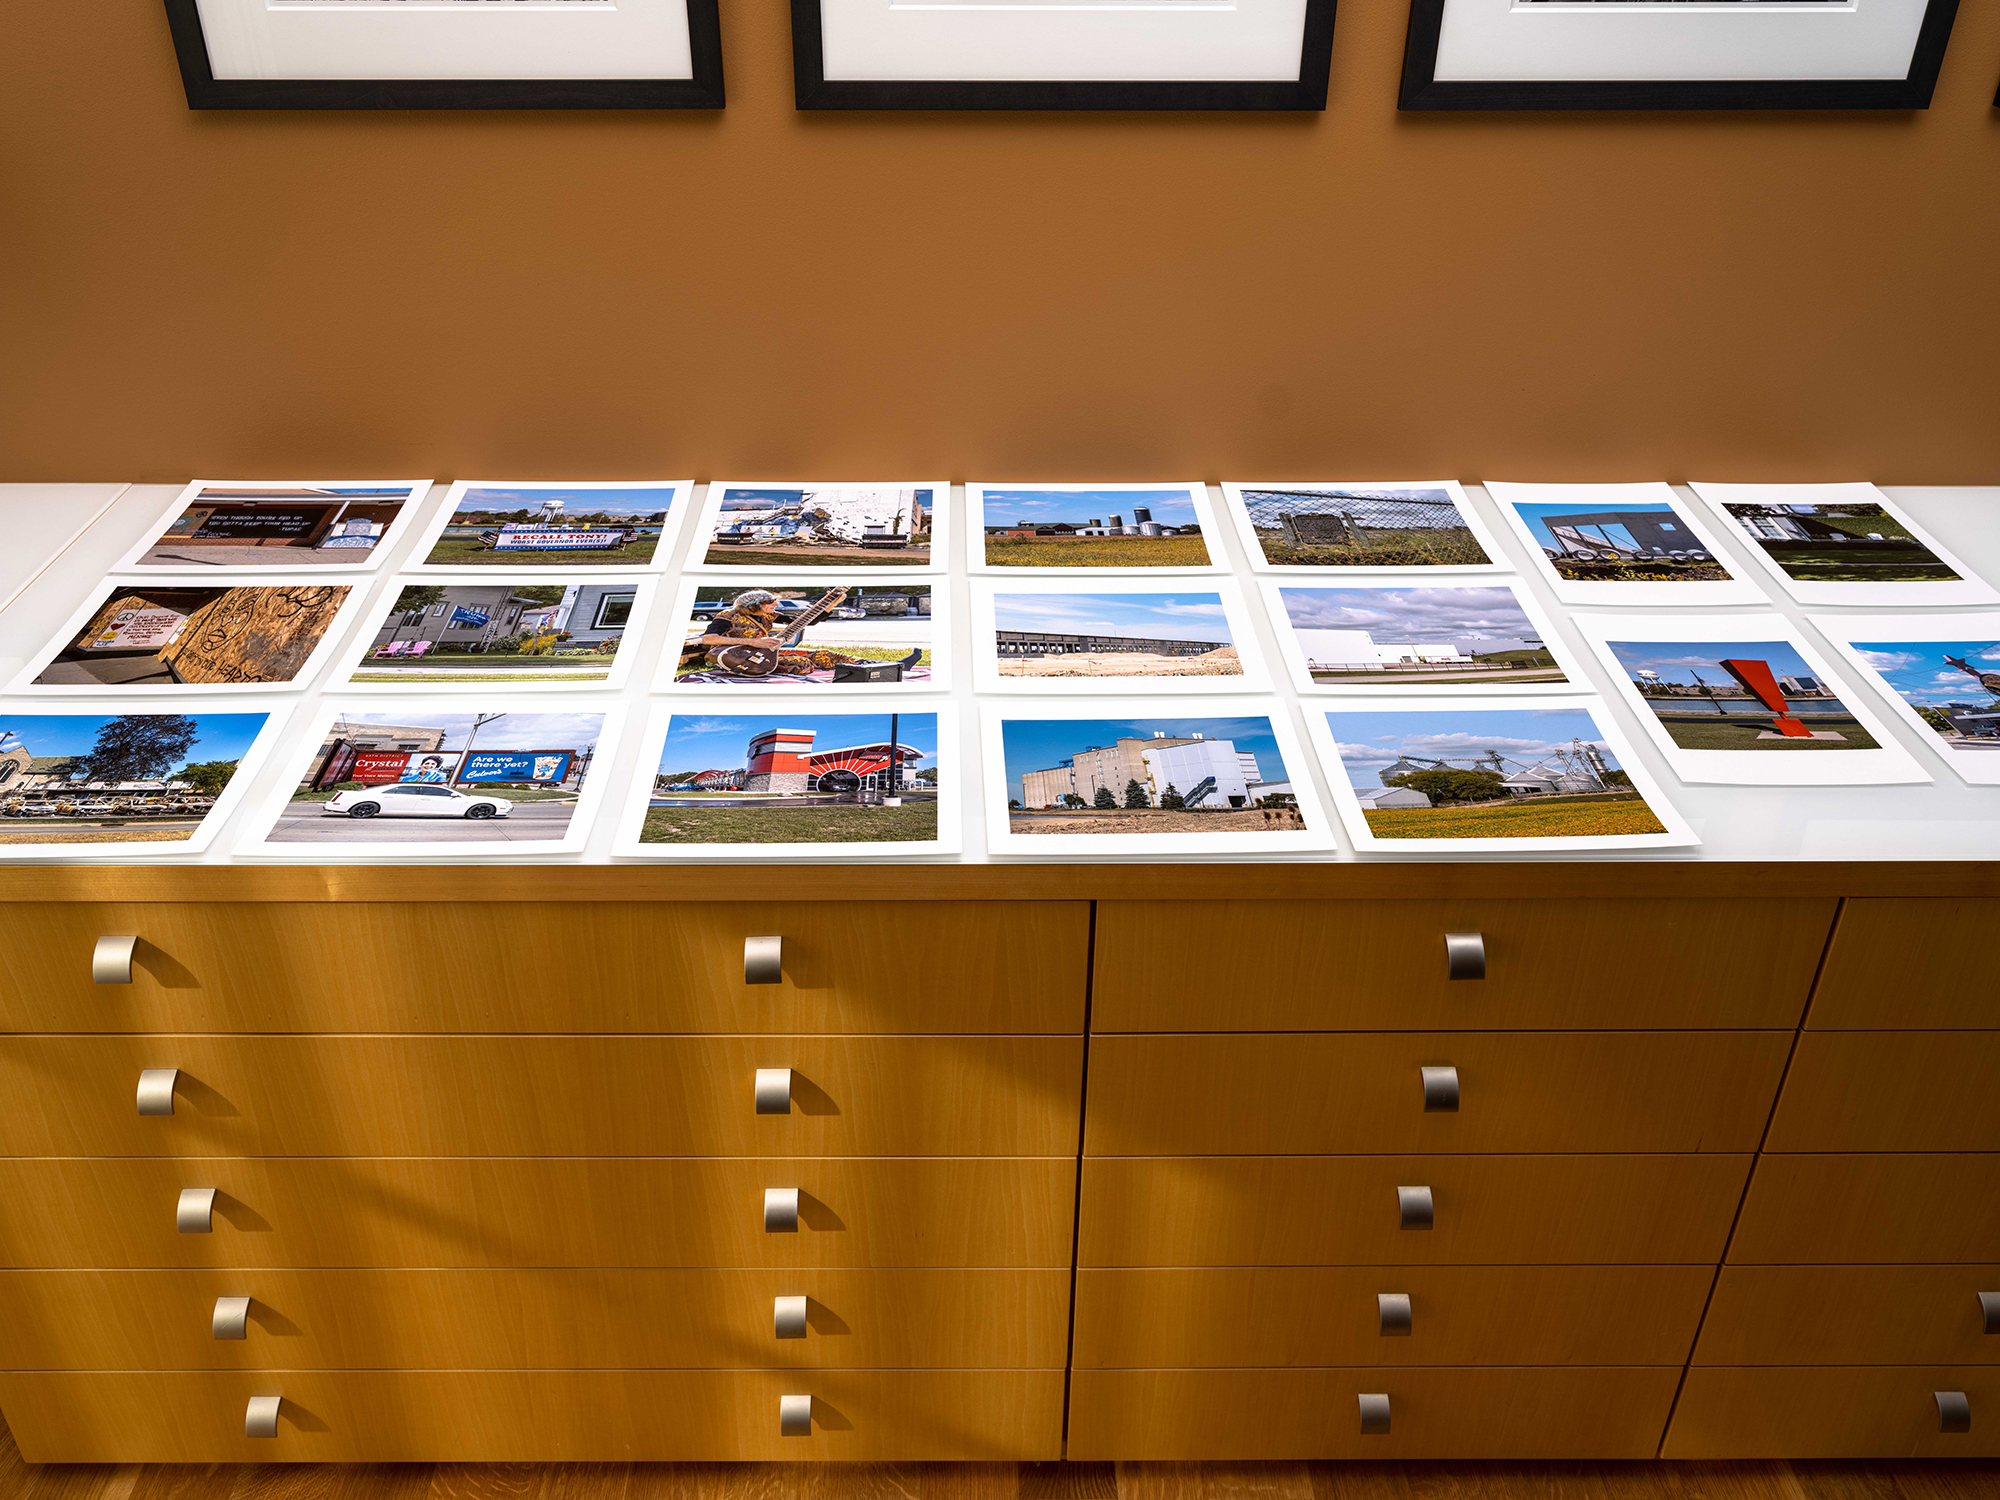 Sometimes the Easiest Way to Sequence Images is on a Counter or Table